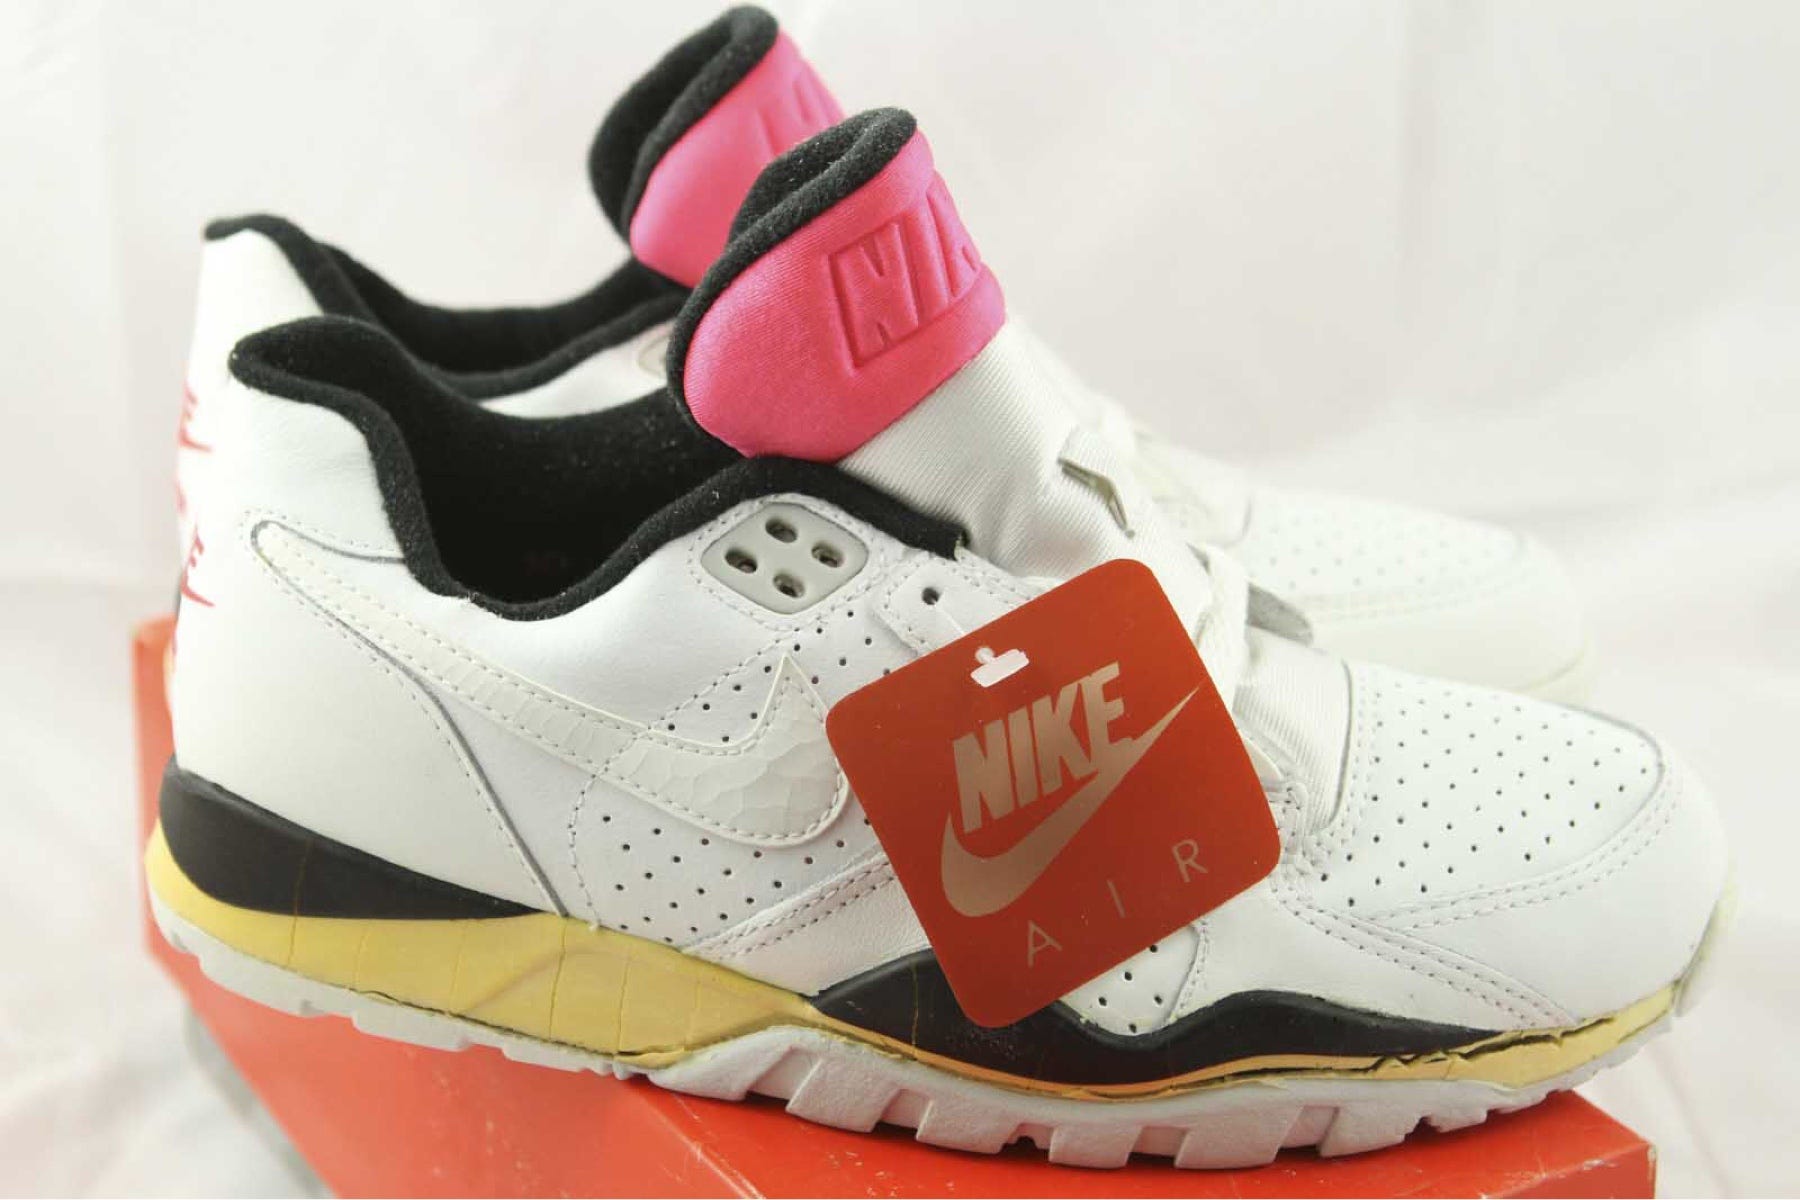 Nike Air Cross Trainer low. Look what I 